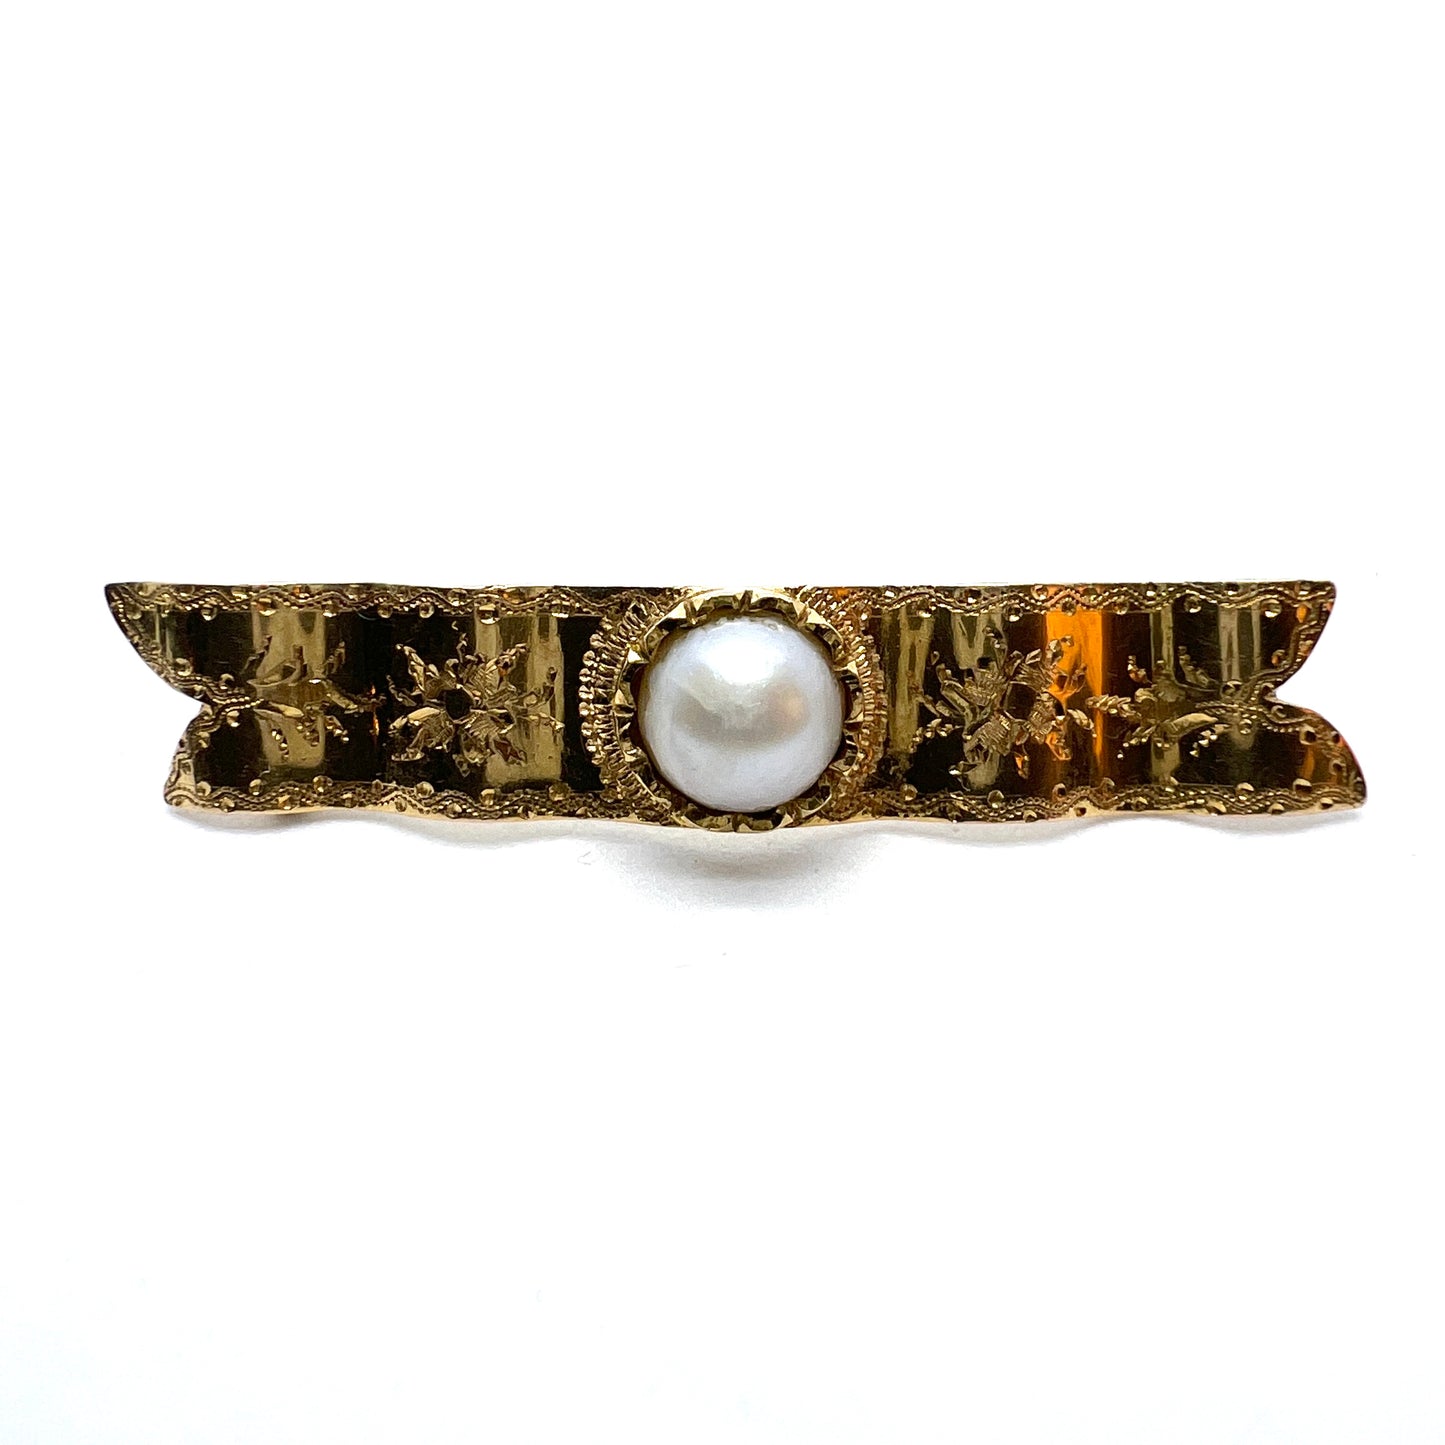 Stockholm 1892, Antique Victorian 18k Gold Pearl Memory Pin Brooch.